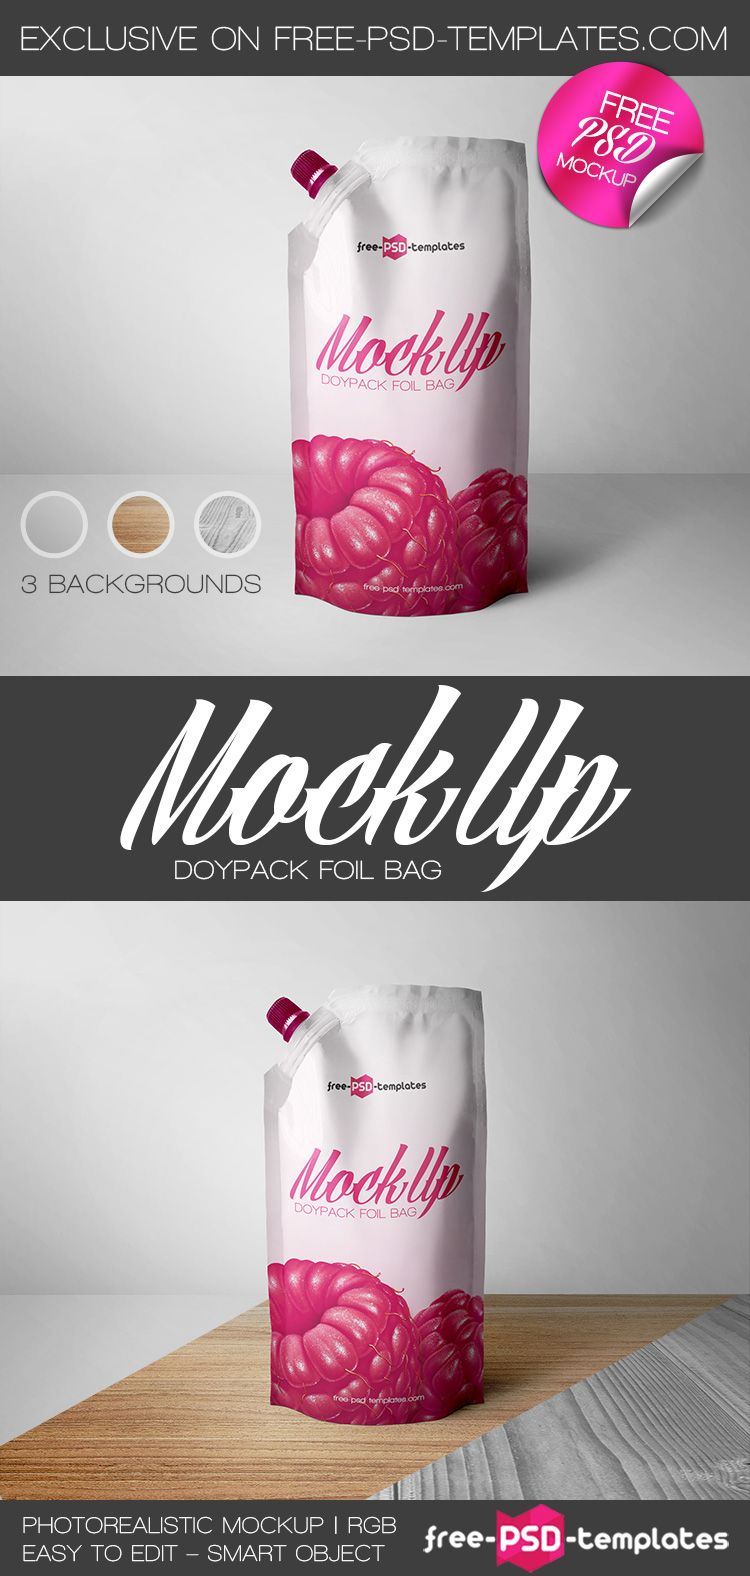 Free Doypack Foil Bag Mock-up in PSD | Psd template free, Mockup free